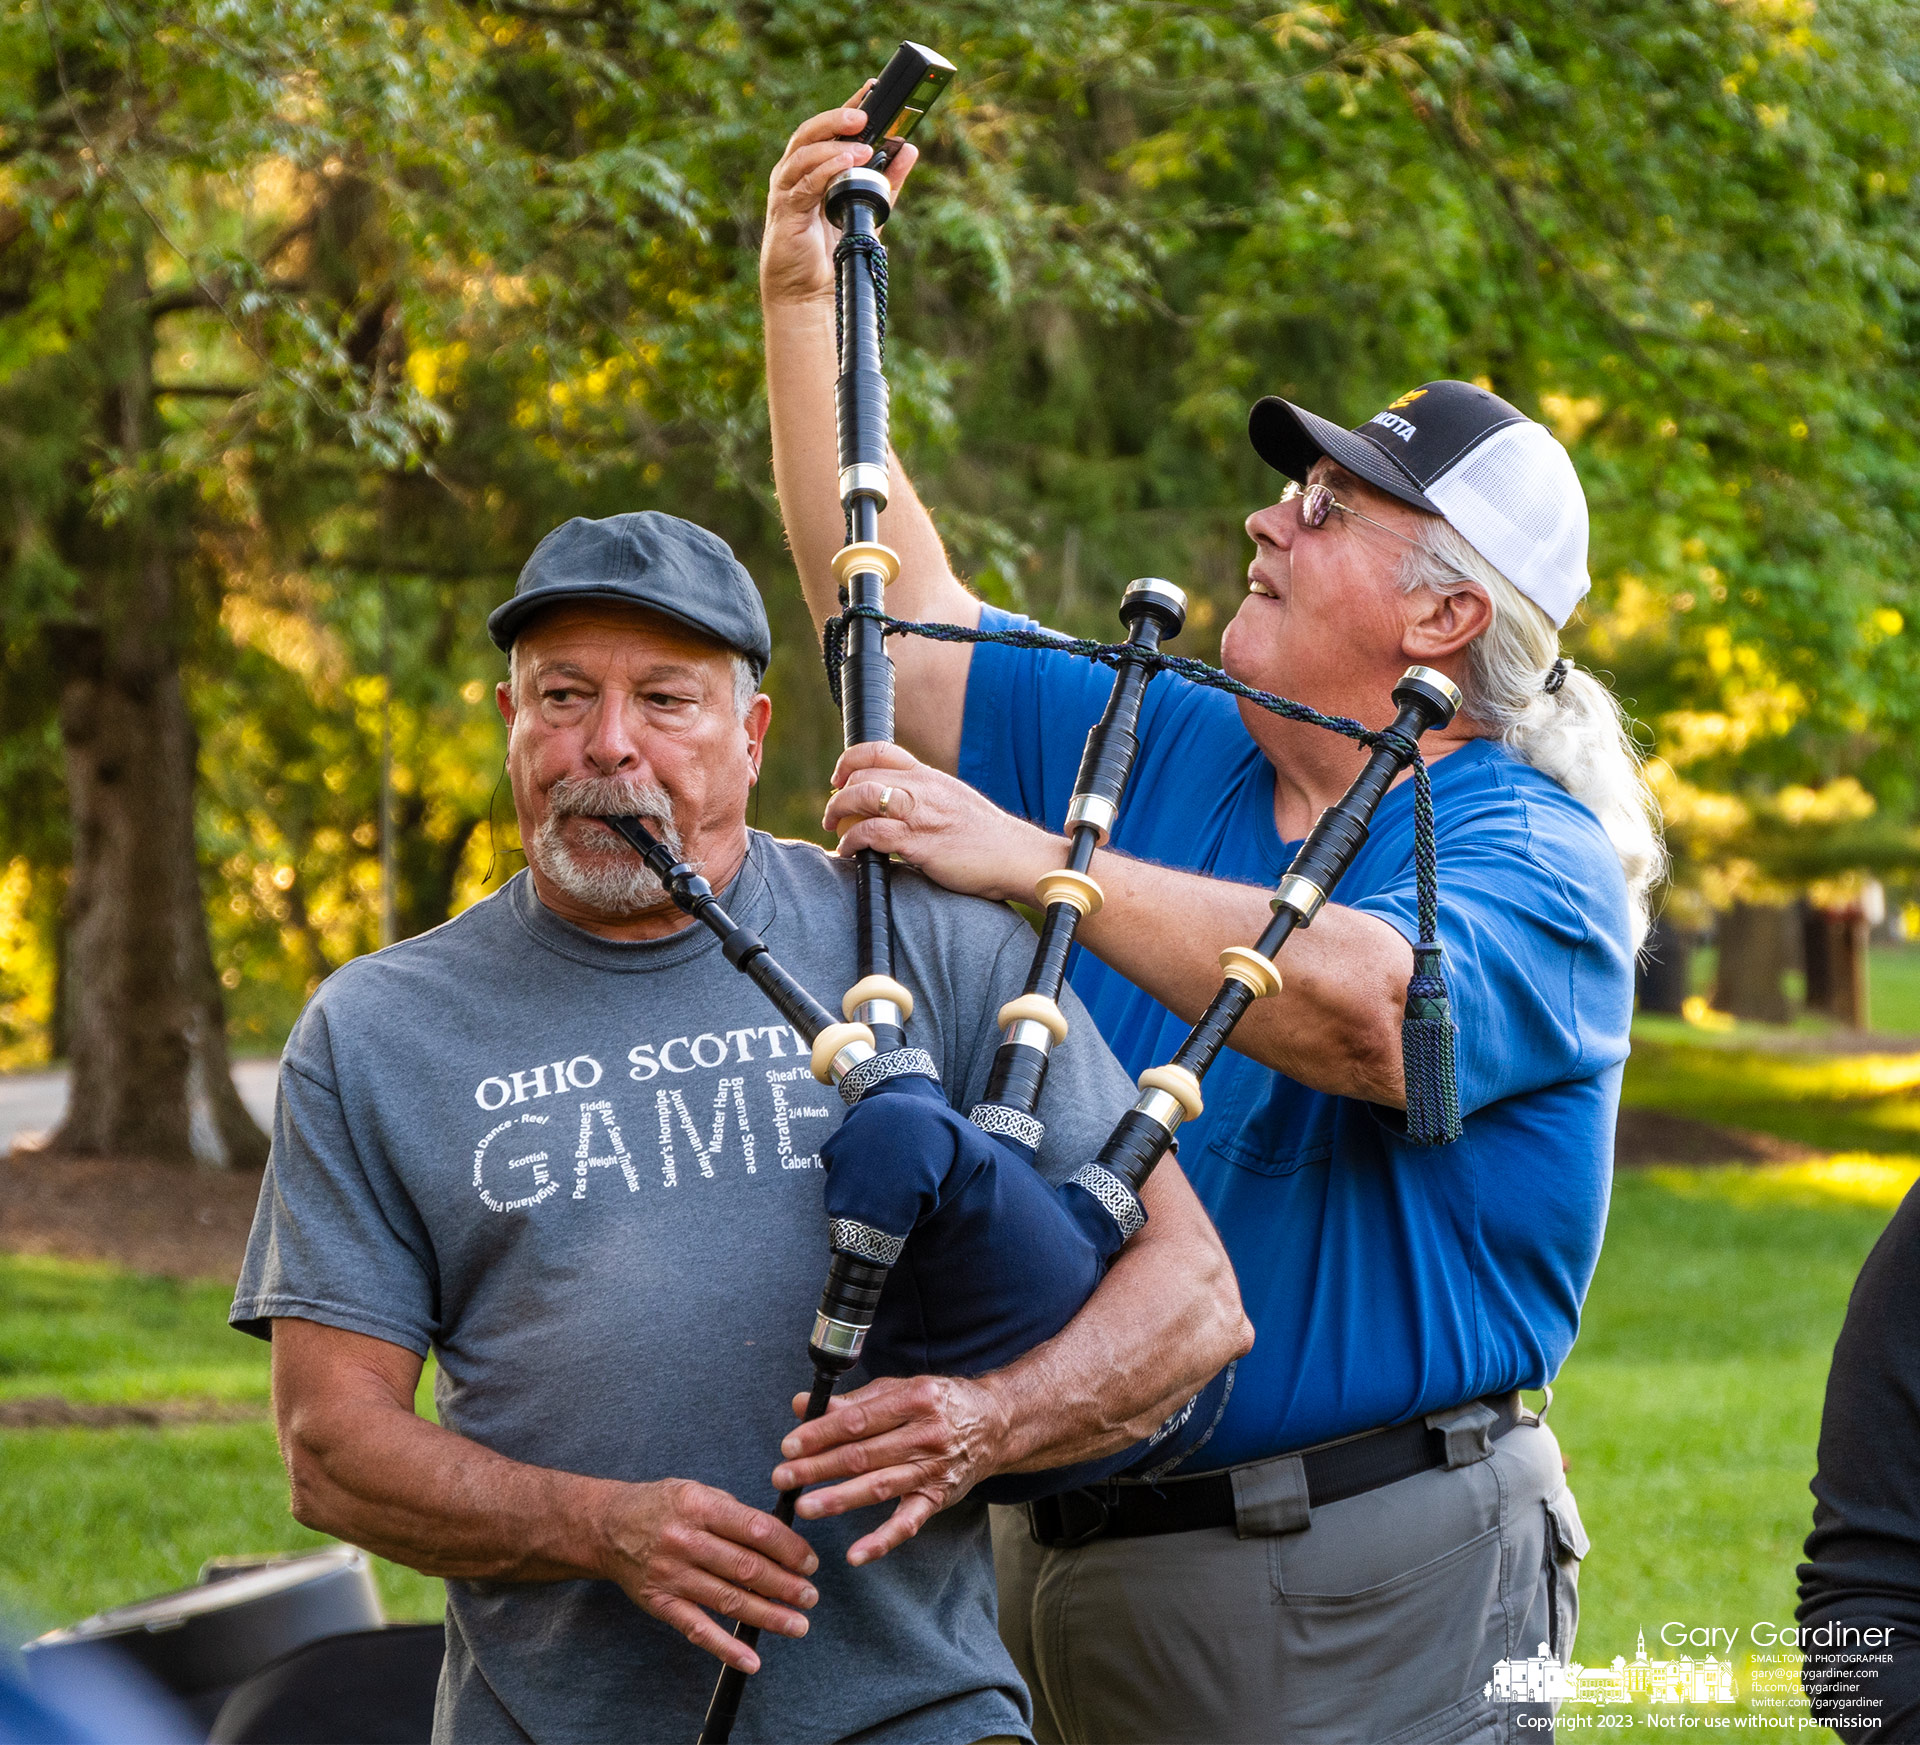 A bagpiper from the Capital City Pipes and Drums Corp gets his instrument tuned during rehearsal at Alum Creek Park North for an upcoming competition and performing during the Andre Rieu concert at the Schottenstein Center. My Final Photo for August 29, 2023.